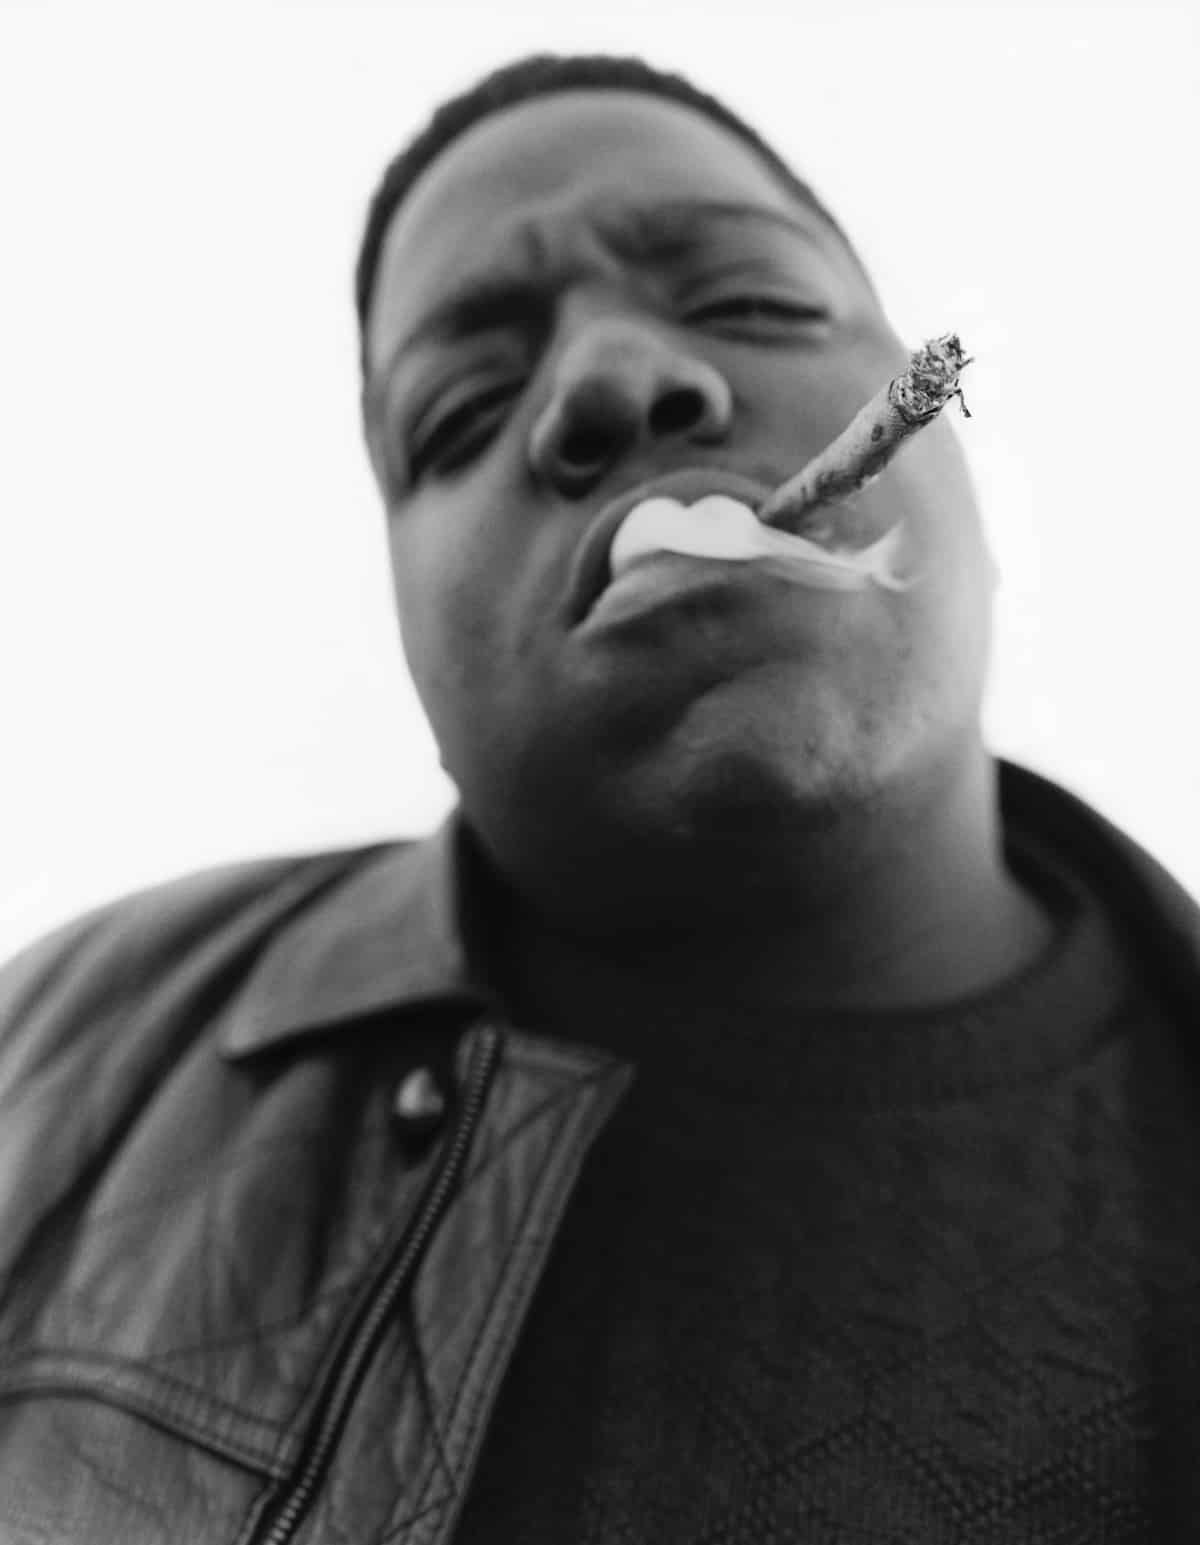 Black and White Portrait of Notorious B.I.G.